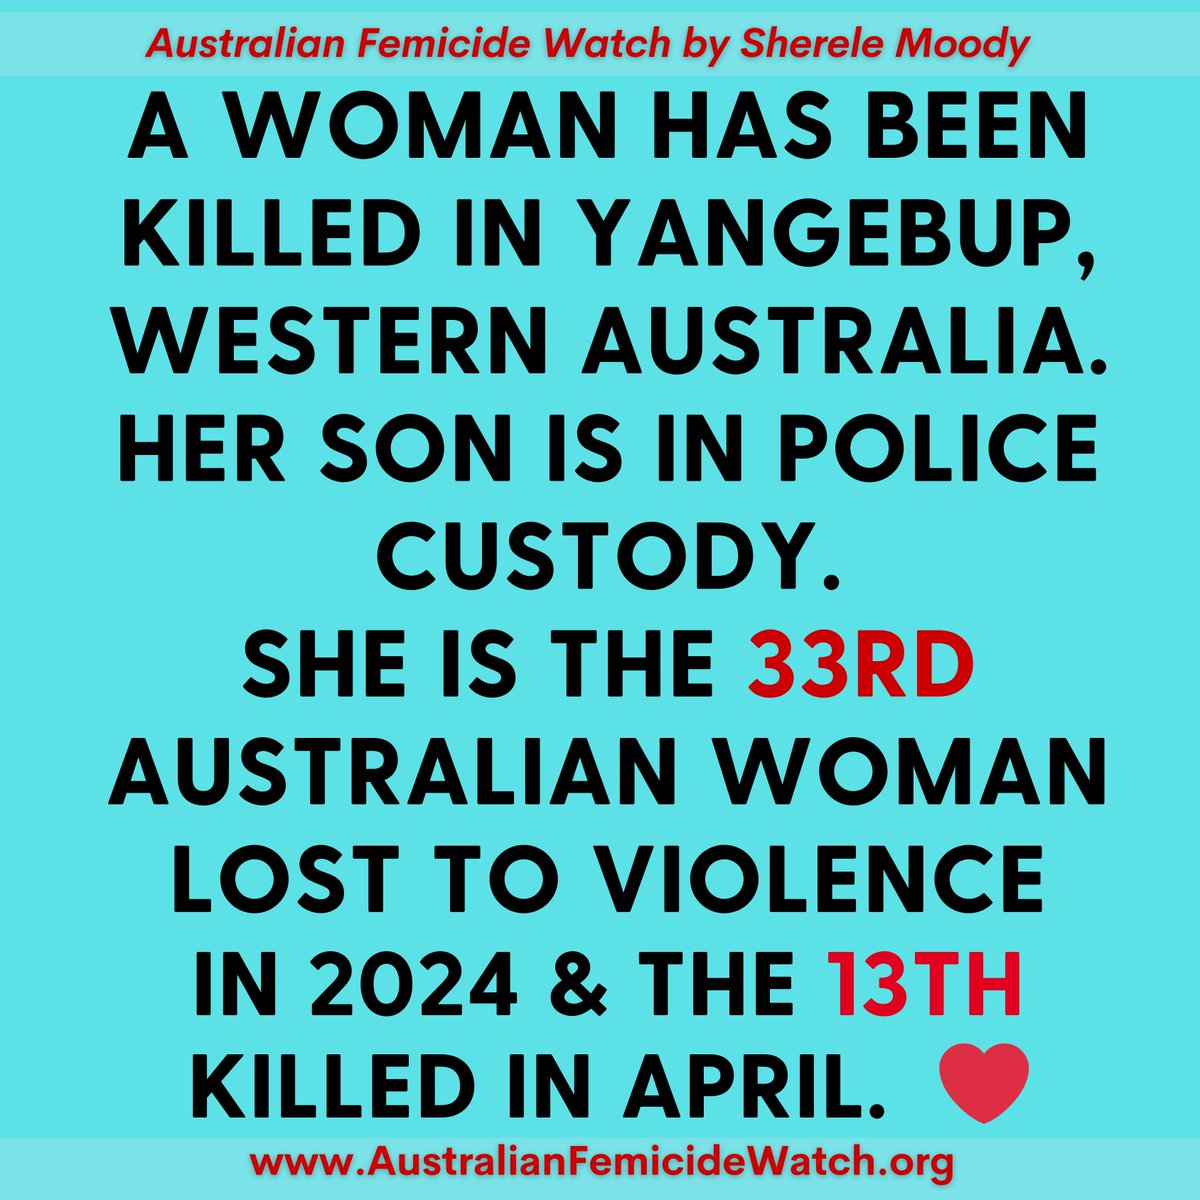 Homicide detectives are interviewing a son over the killing of his mother at Yangebup in Western Australian. She is the 33rd Australian woman killed this year and the 13th killed in the past 29 days. ❤️